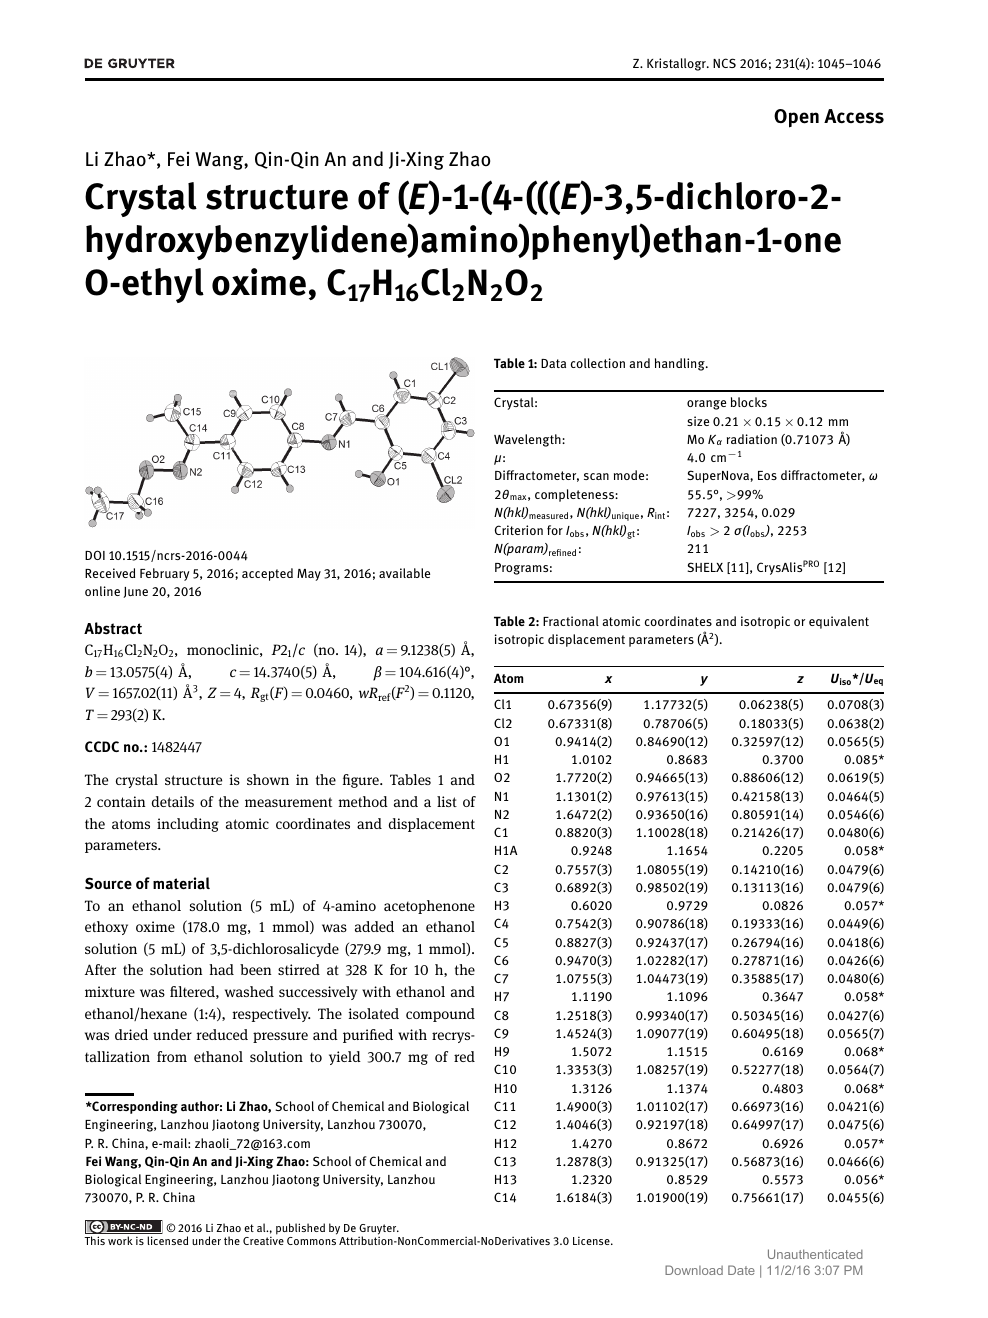 Crystal Structure Of E 1 4 E 3 5 Dichloro 2 Hydroxybenzylidene Amino Phenyl Ethan 1 One O Ethyl Oxime C17h16cl2n2o2 Topic Of Research Paper In Chemical Sciences Download Scholarly Article Pdf And Read For Free On Cyberleninka Open Science Hub